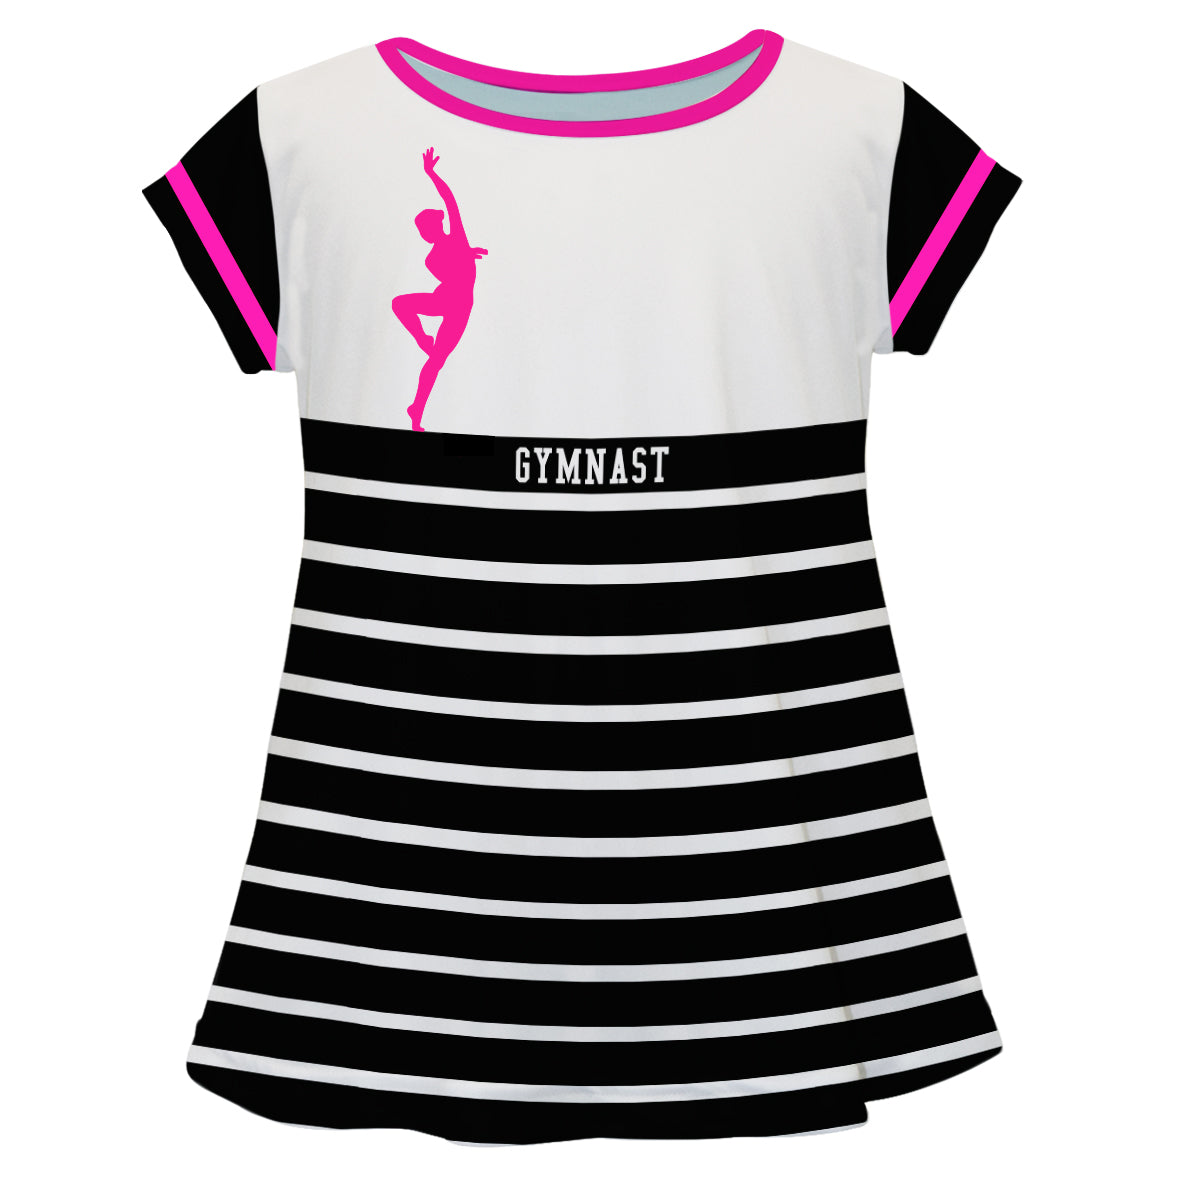 Gymnast Stripe White and Black Short Sleeve Laurie Top - Wimziy&Co.